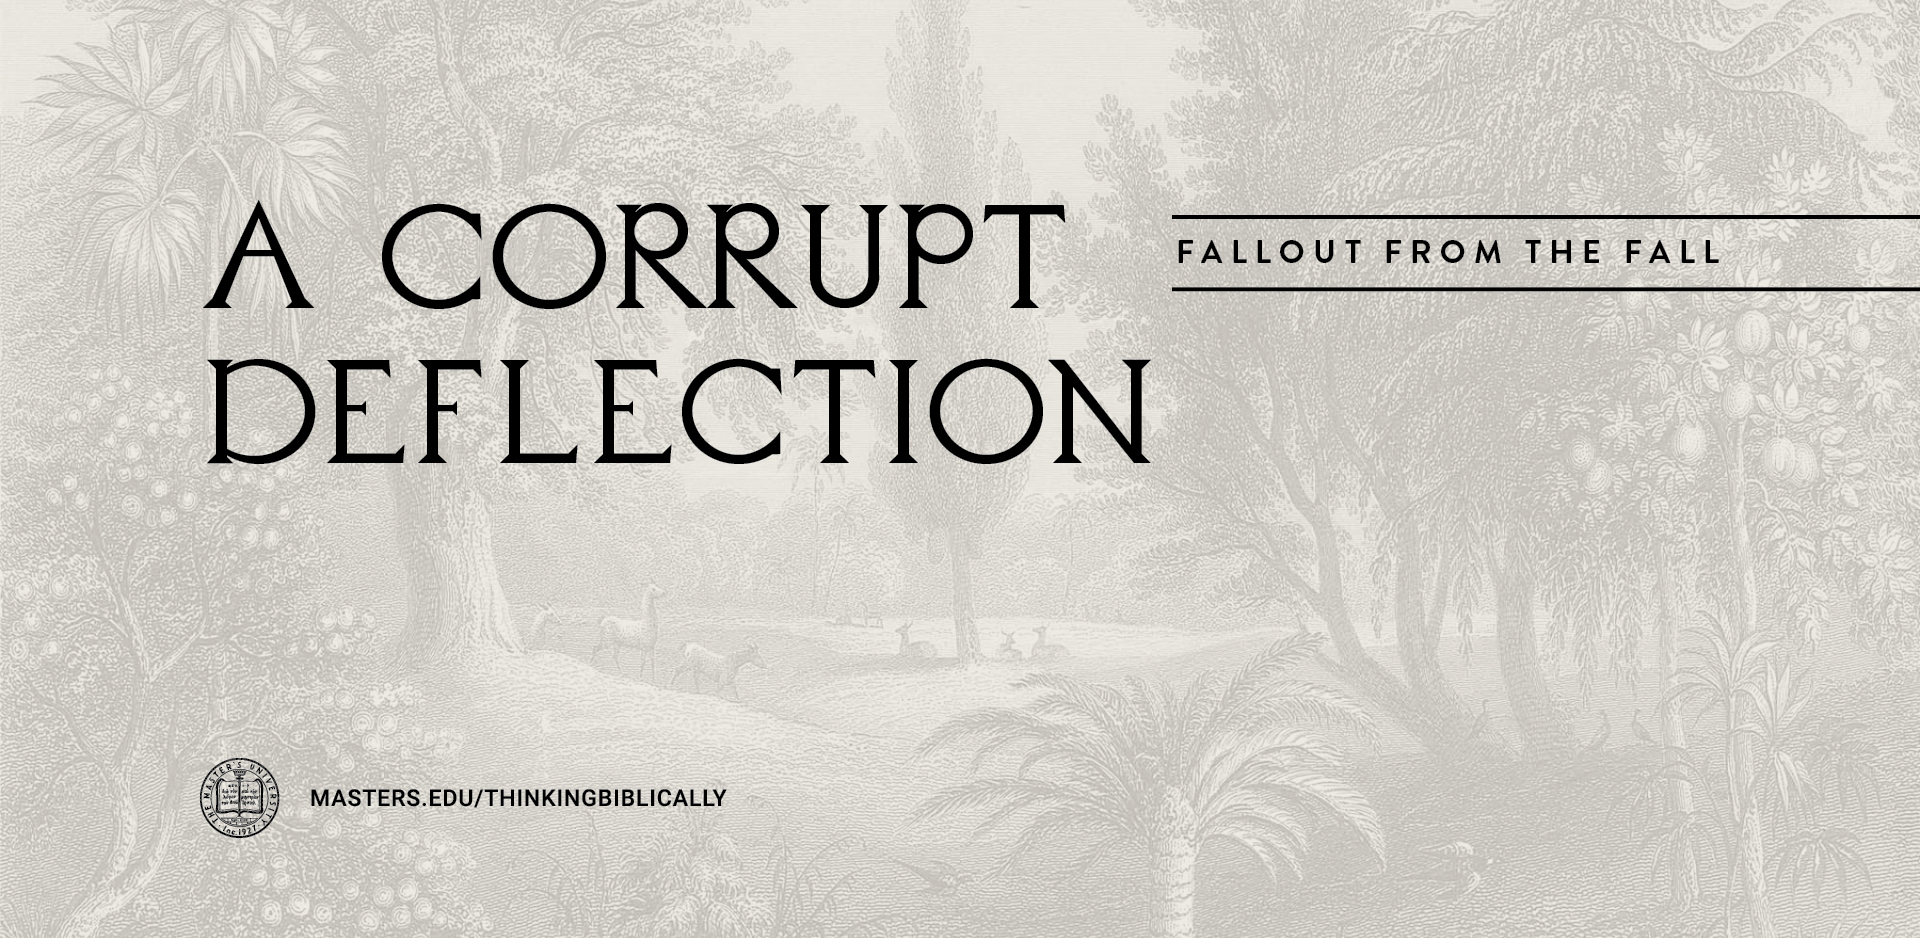 A Corrupt Deflection Featured Image